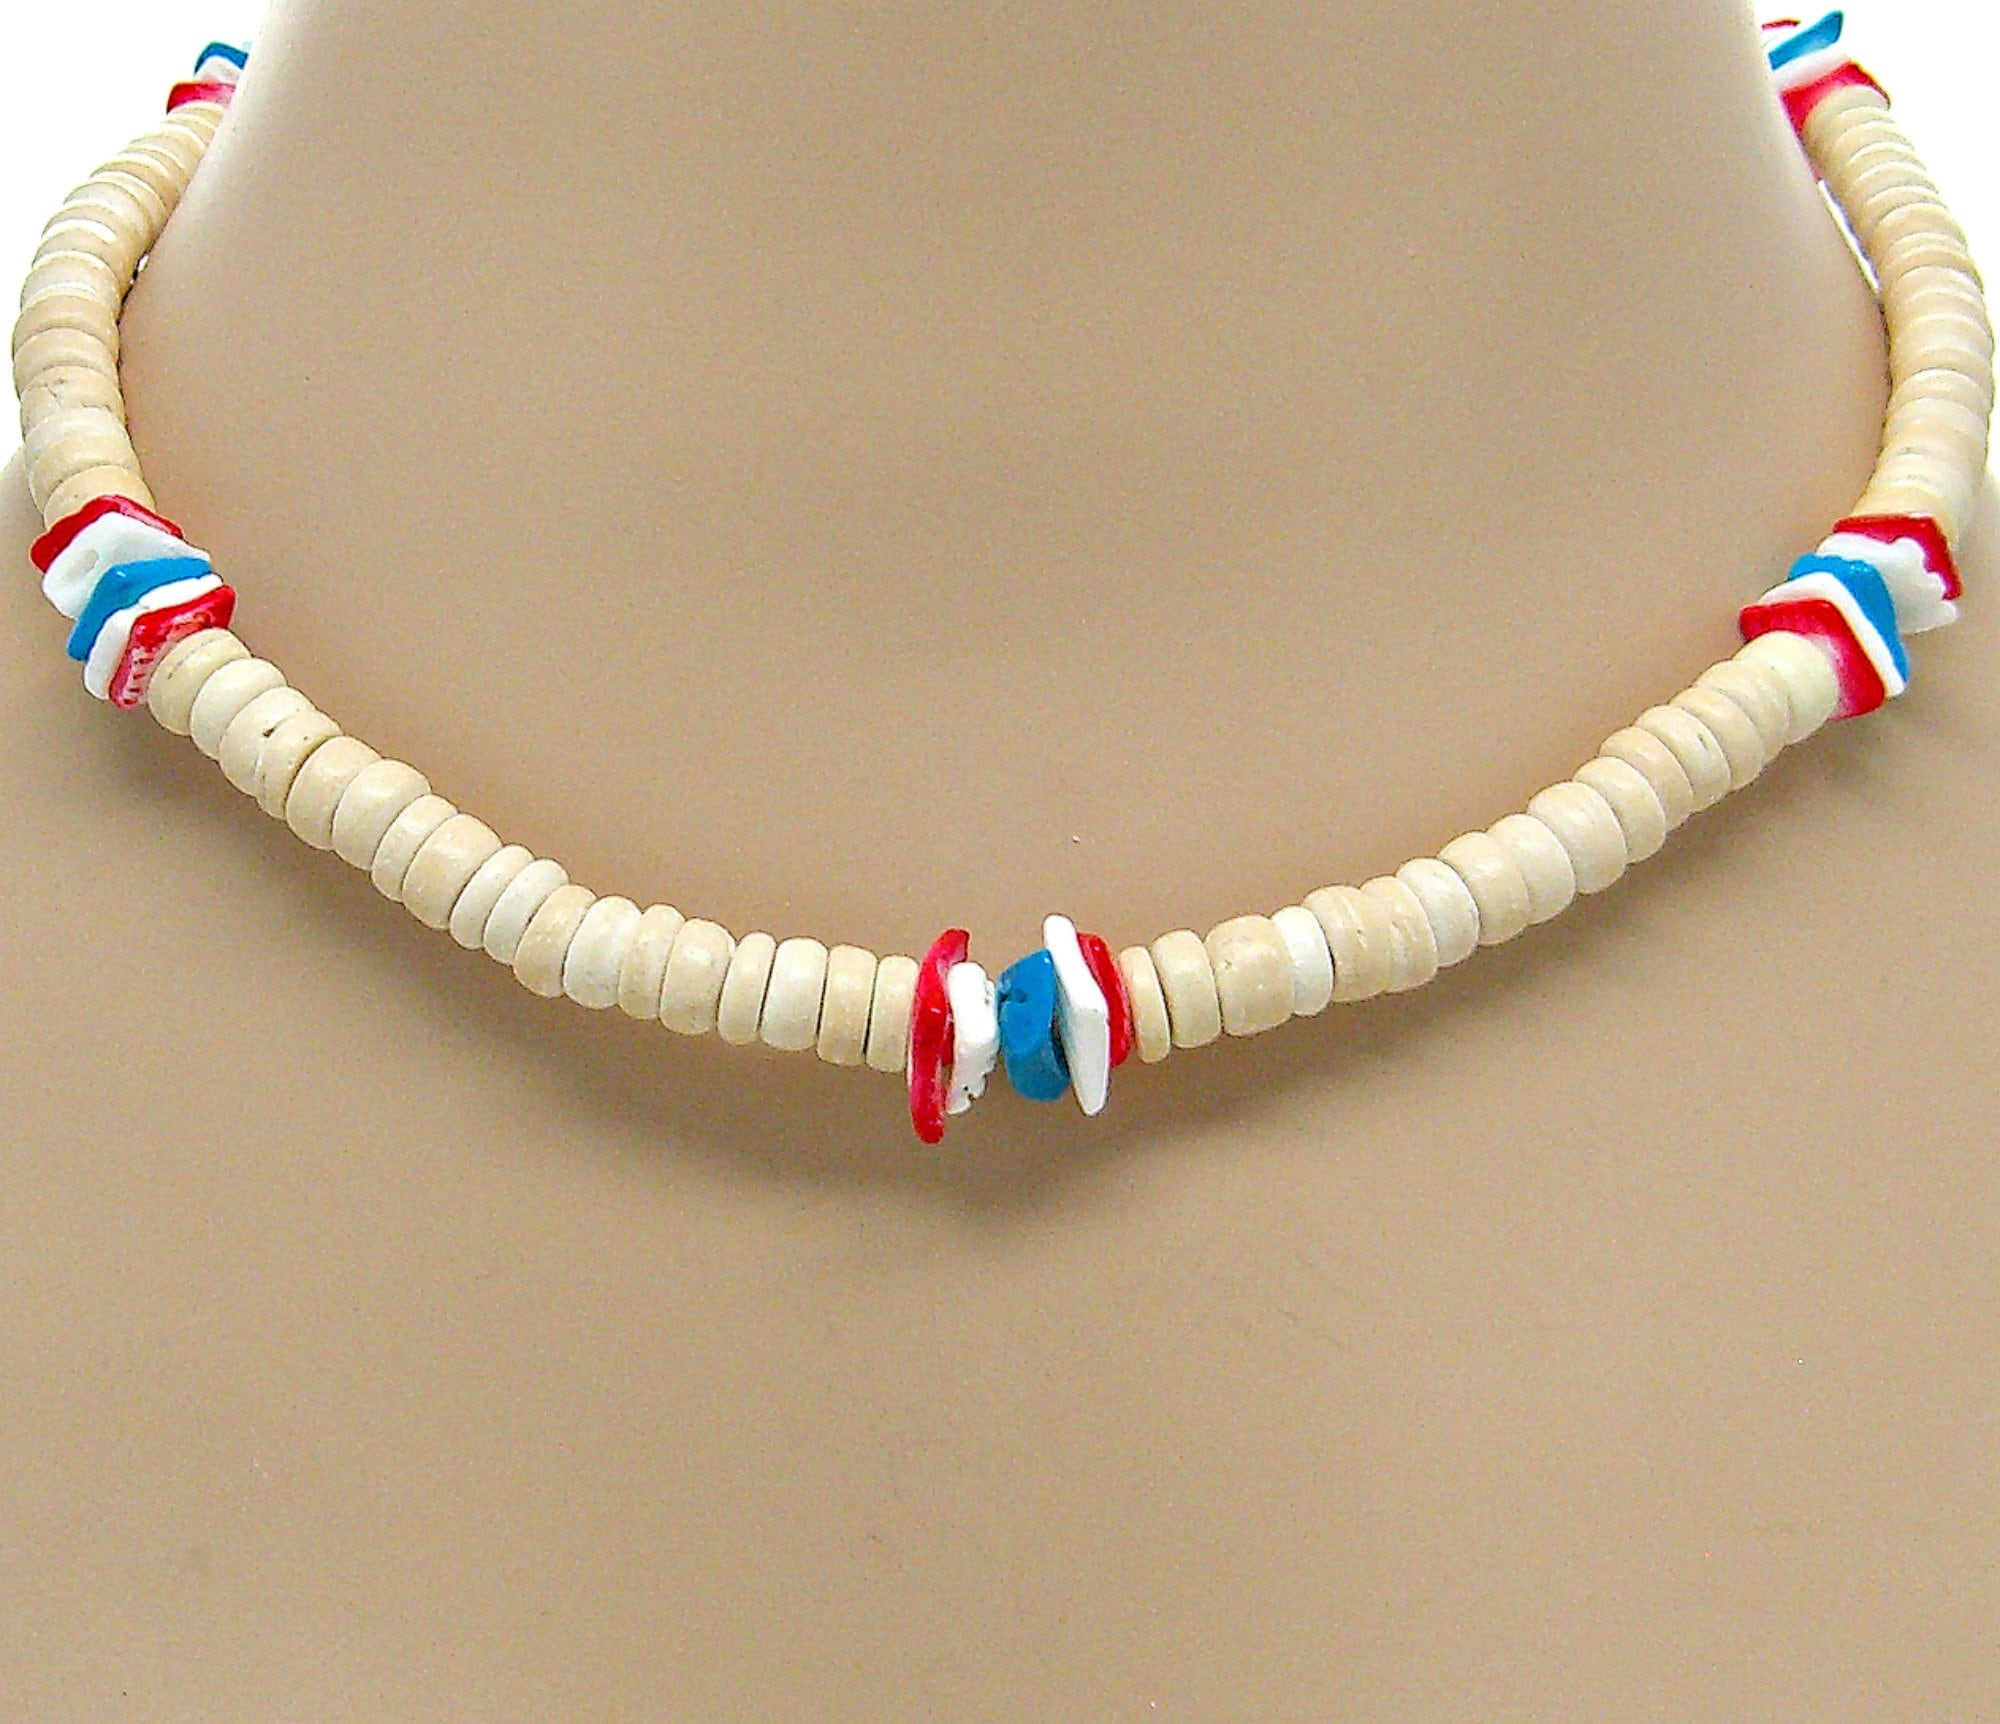 Exotic & Trendy Jewelry Books and more Puka Necklace 18 Inch-Surfer Necklace  Puka Shell Necklace Beach Necklace - Shell Necklace-Hawaiian Necklace Beach  Necklace | Amazon.com